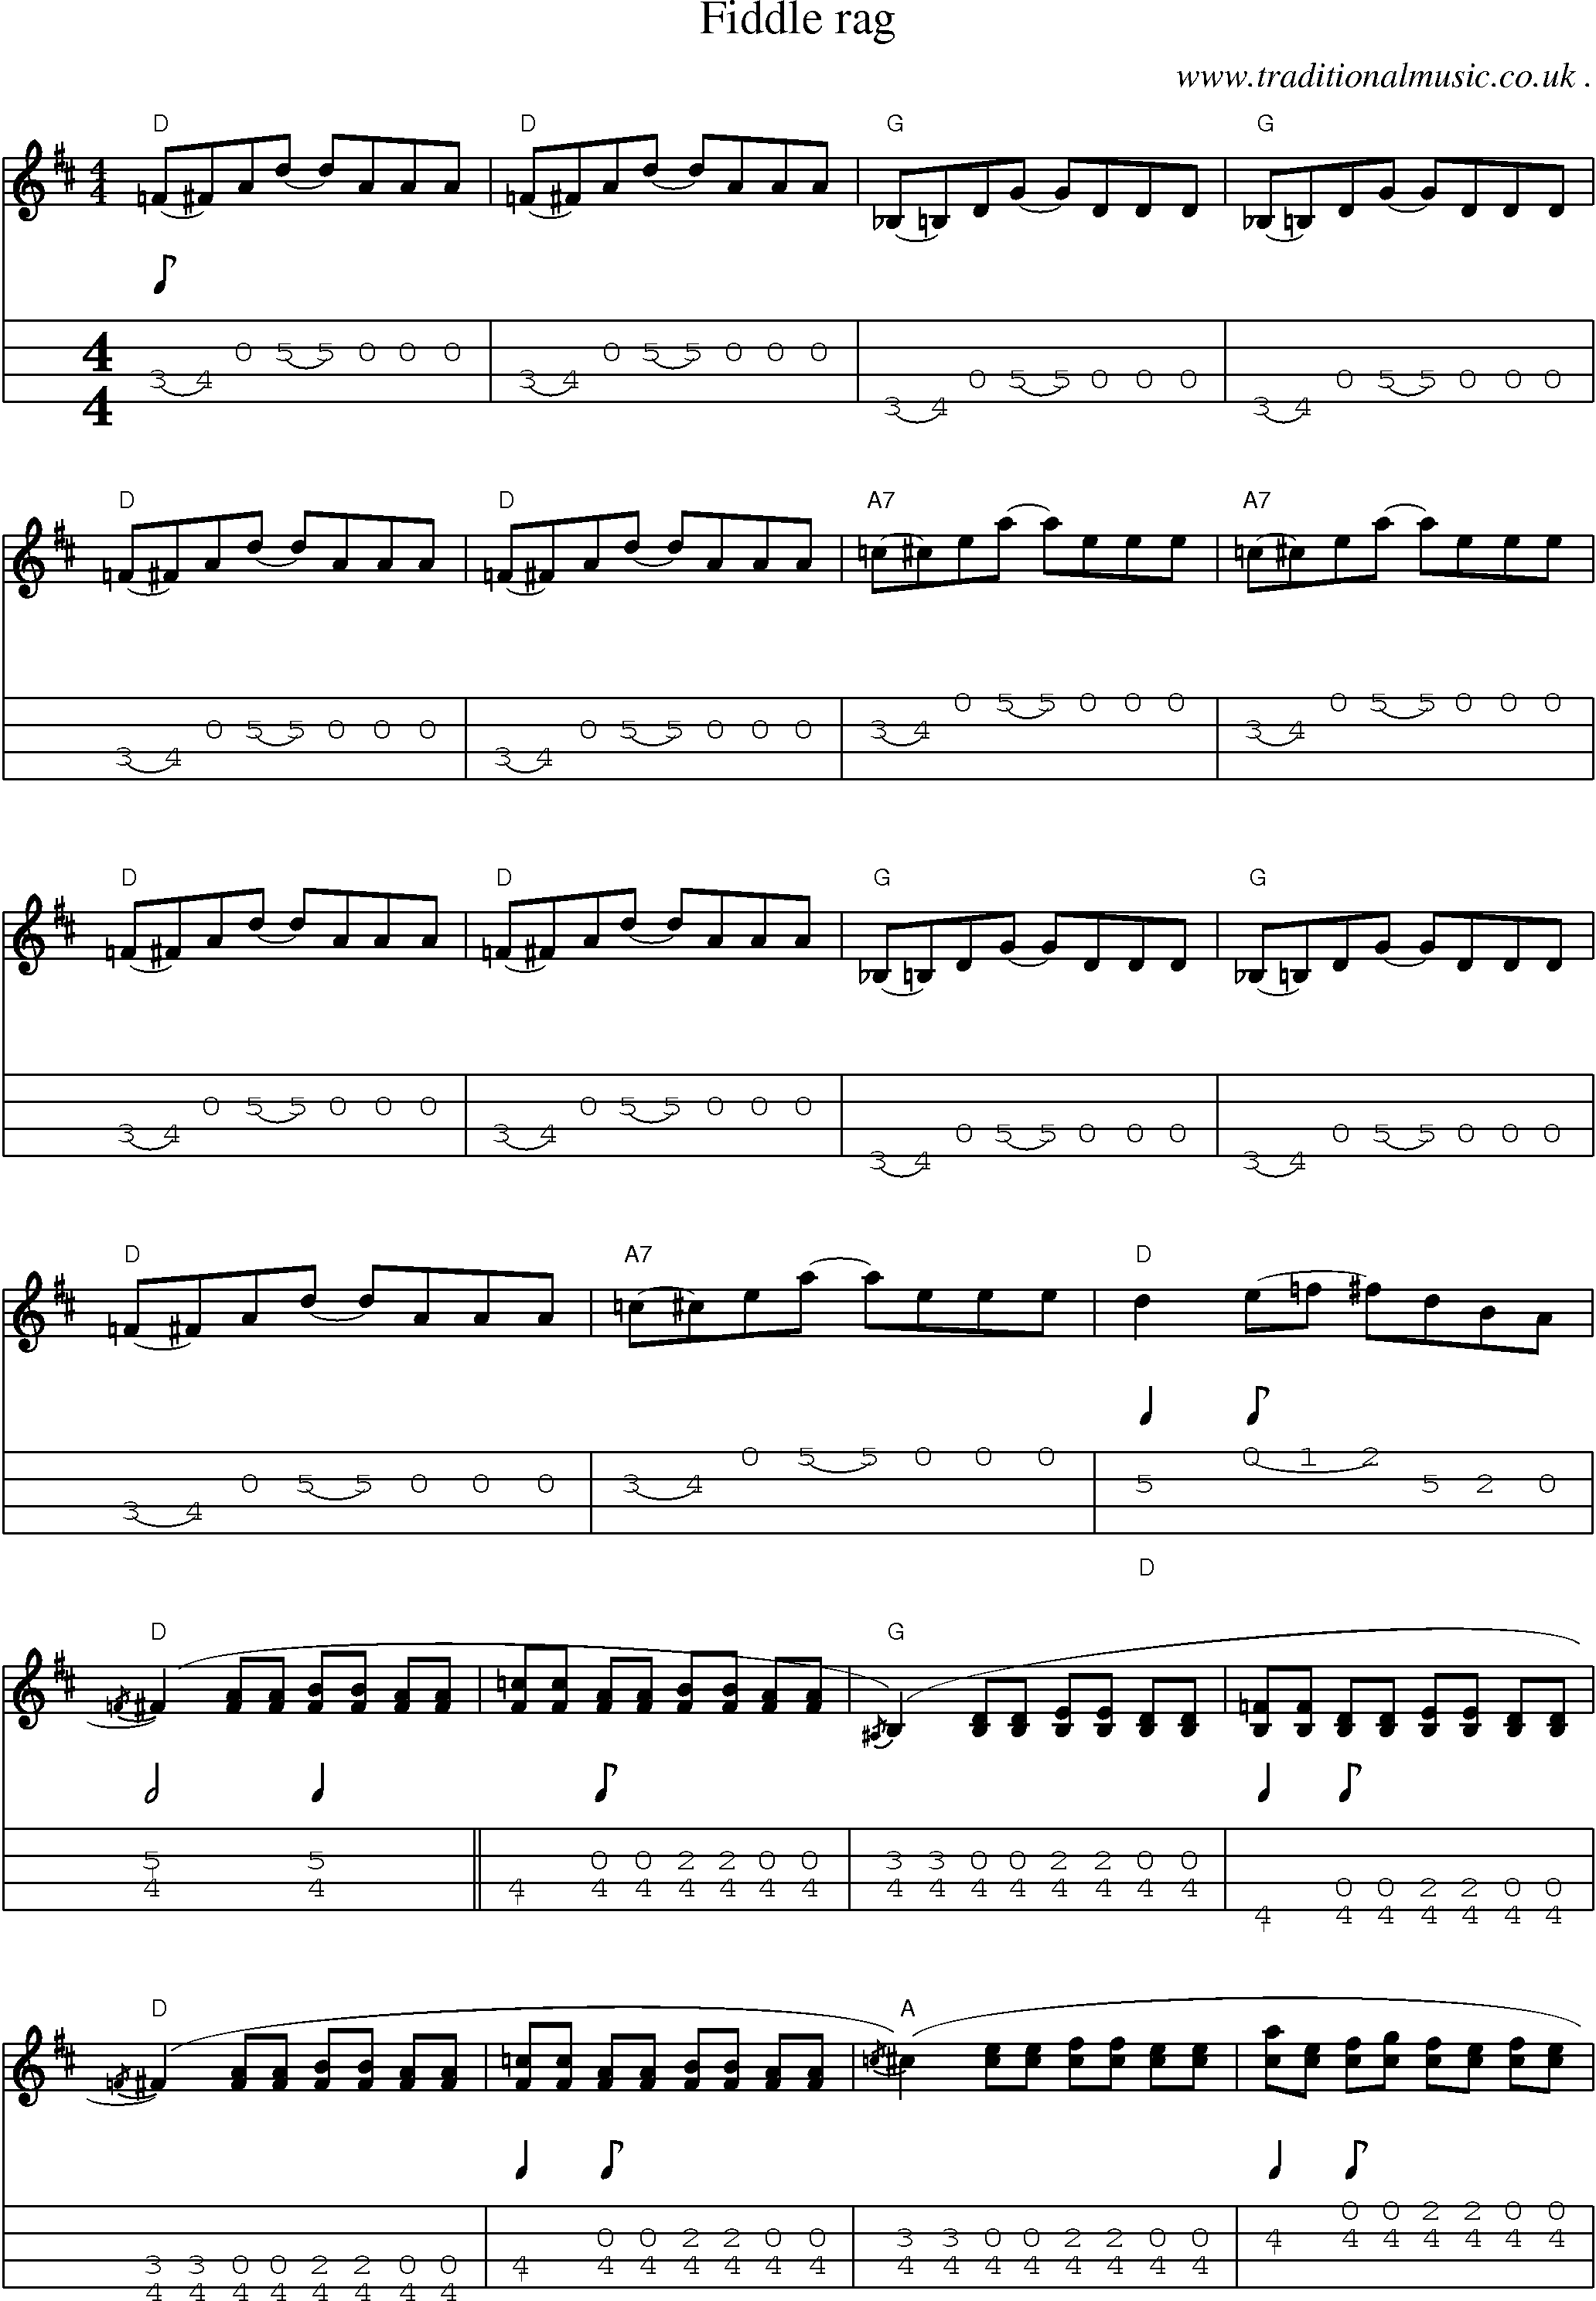 Music Score and Guitar Tabs for Fiddle Rag